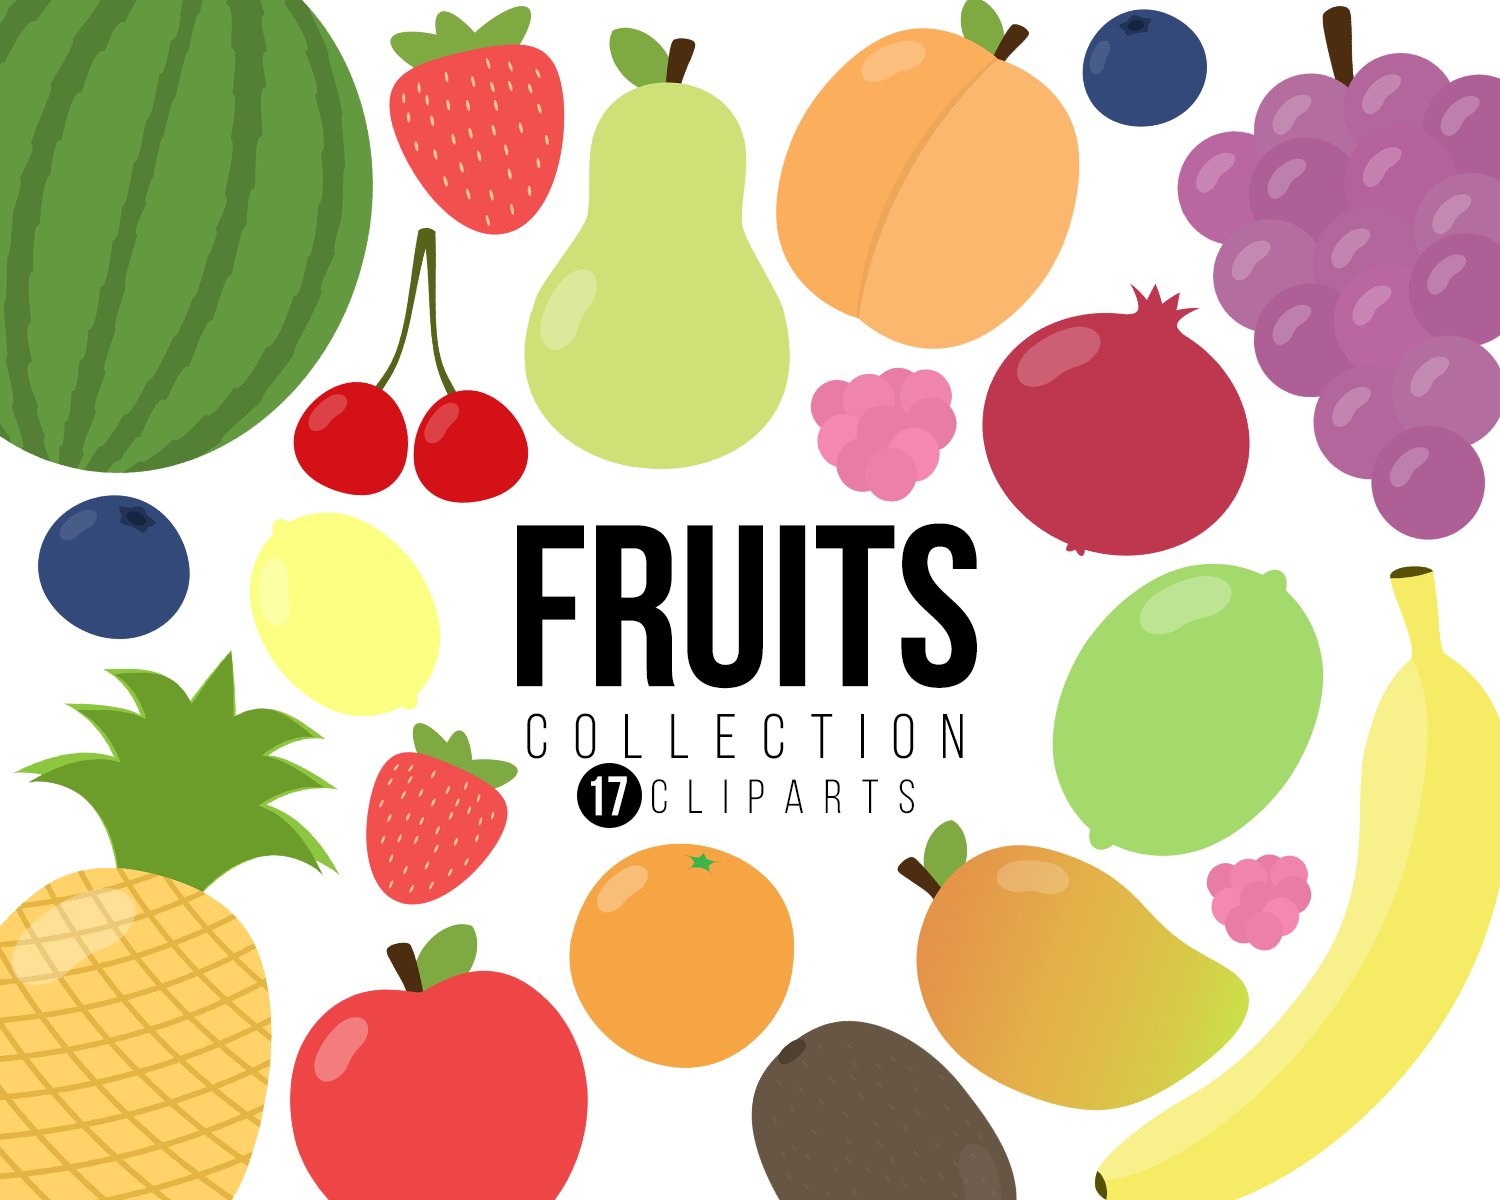 Fruit Clipart Collection cover image.